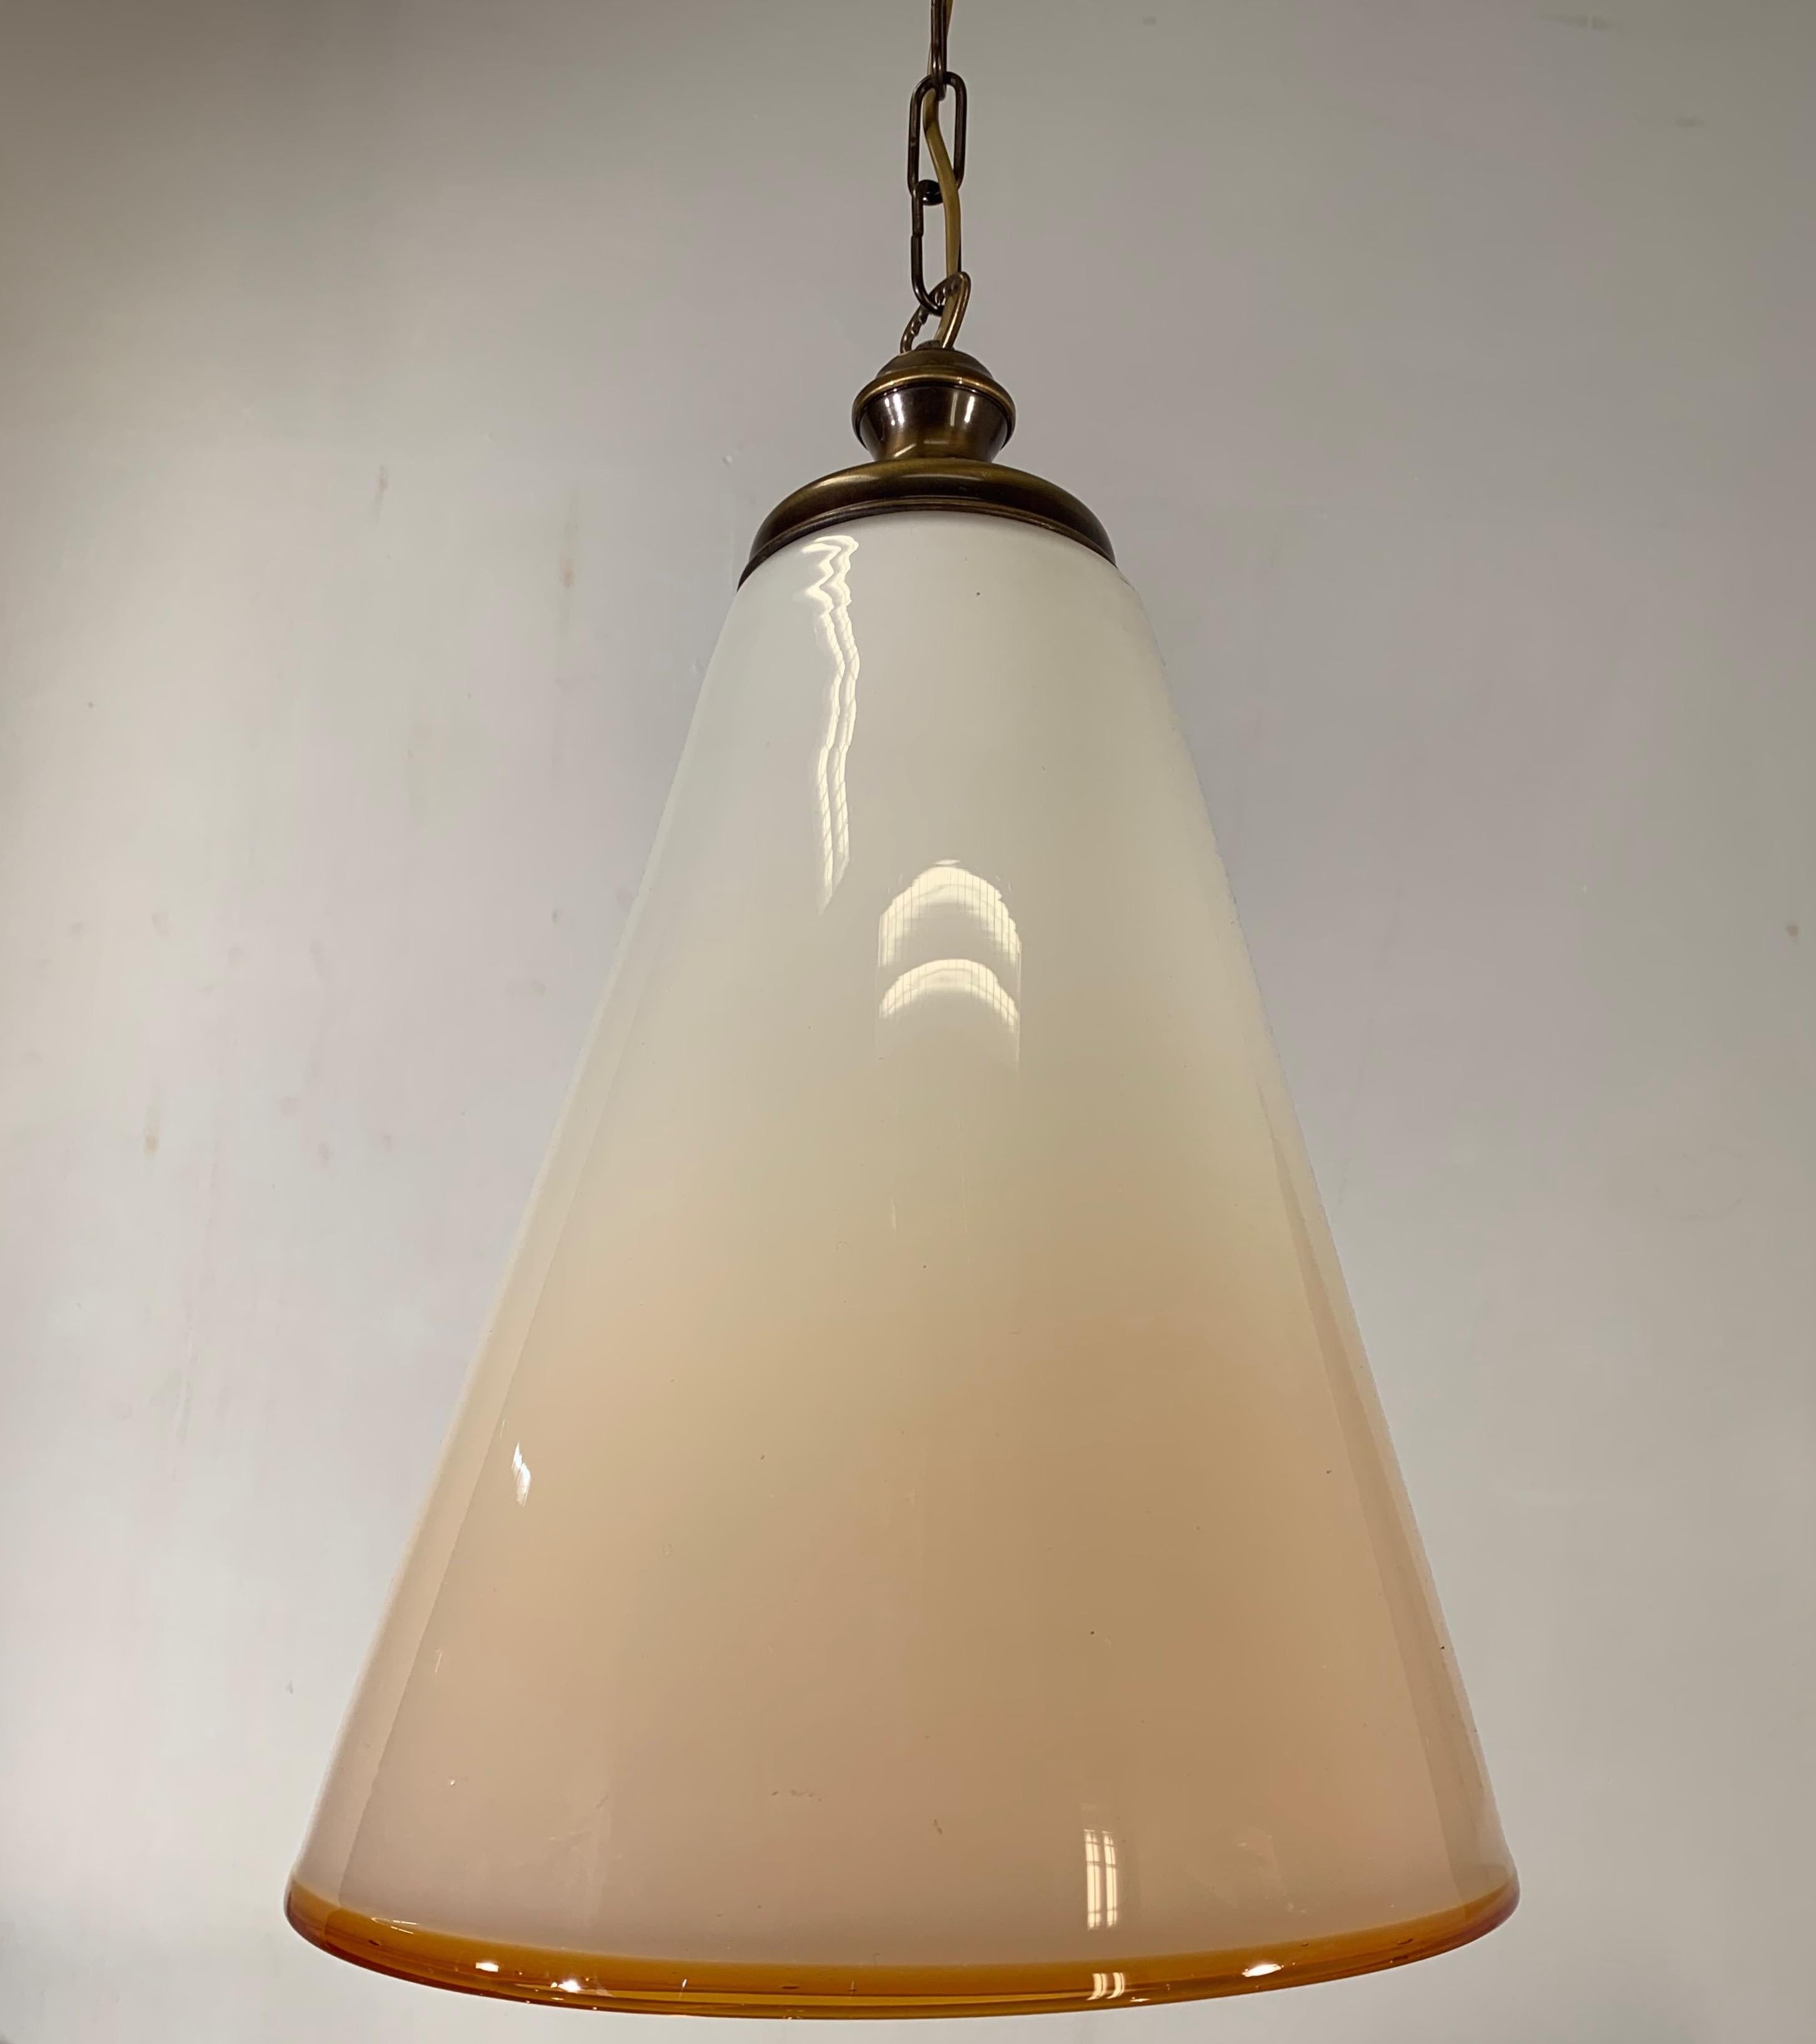 Great shape, mouthblown Venetian light fixture by Seguso.

This large size Murano glass pendant from the 1960s is a truly exquisite ligh fixture and she is in very good and original condition. The slightly rippled surface gives this stunning fixture